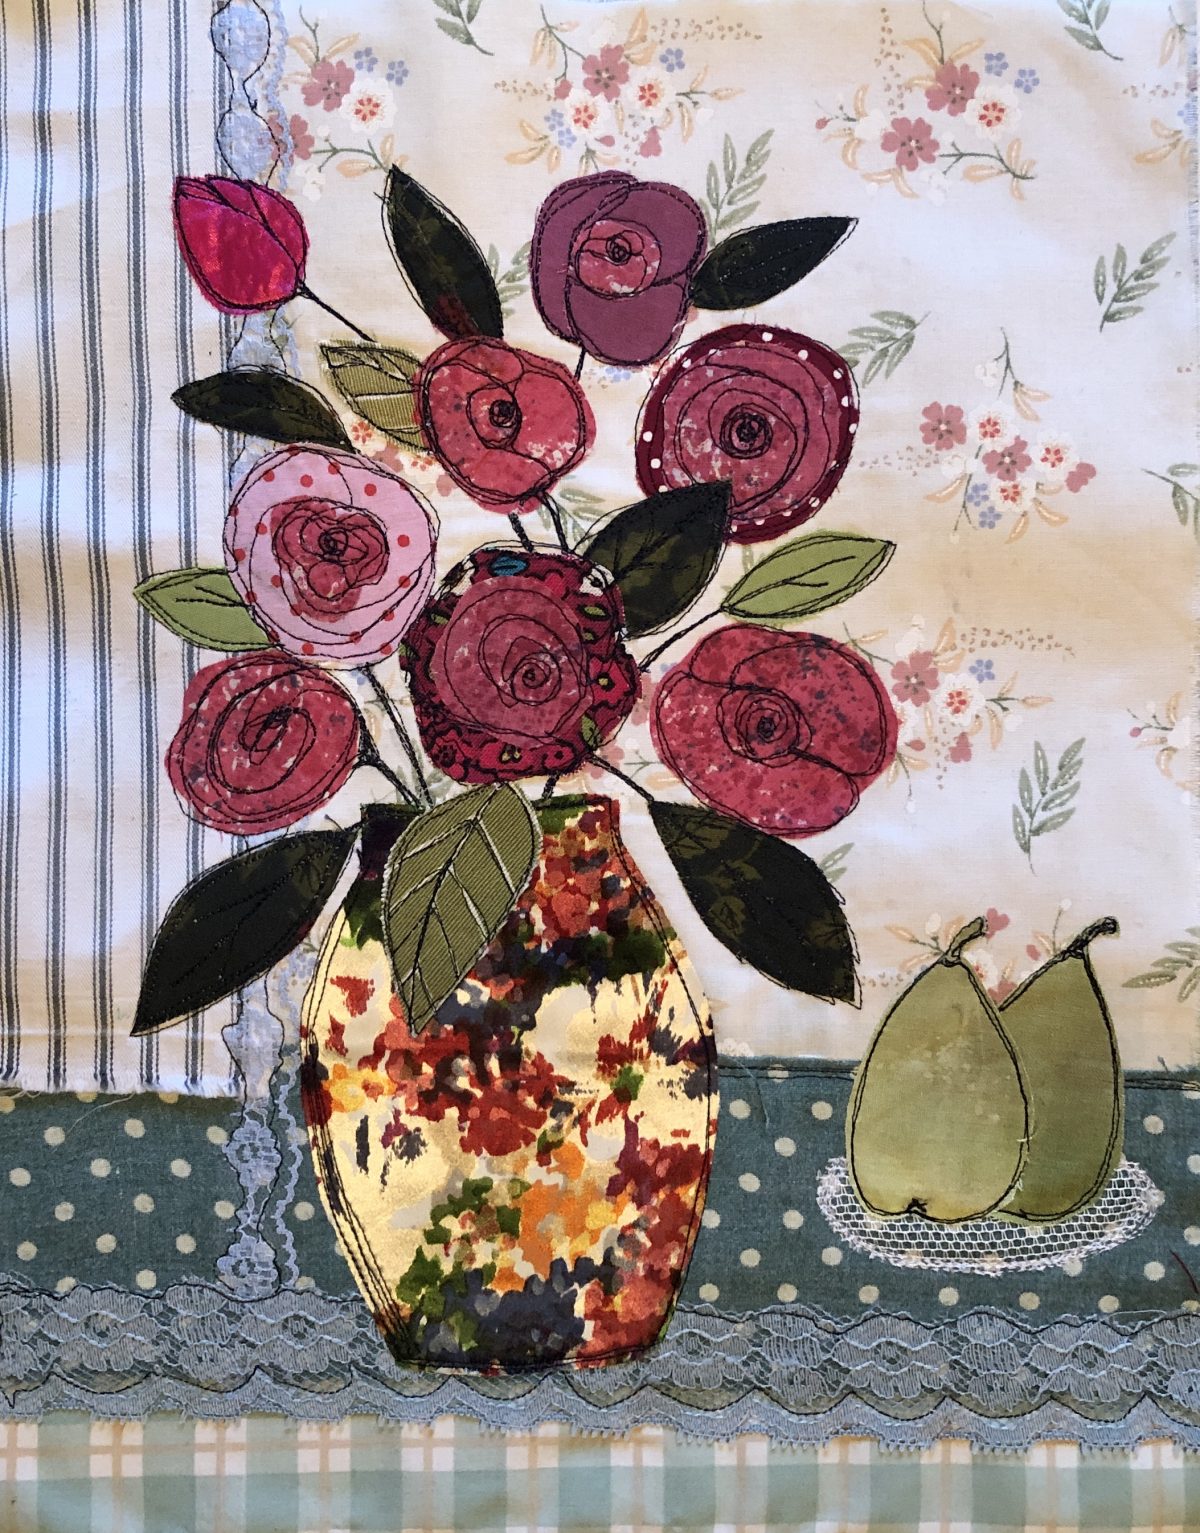 Applique a Bouquet - image shows a stitched picture of a stylised vase of flowers using vintage fabrics